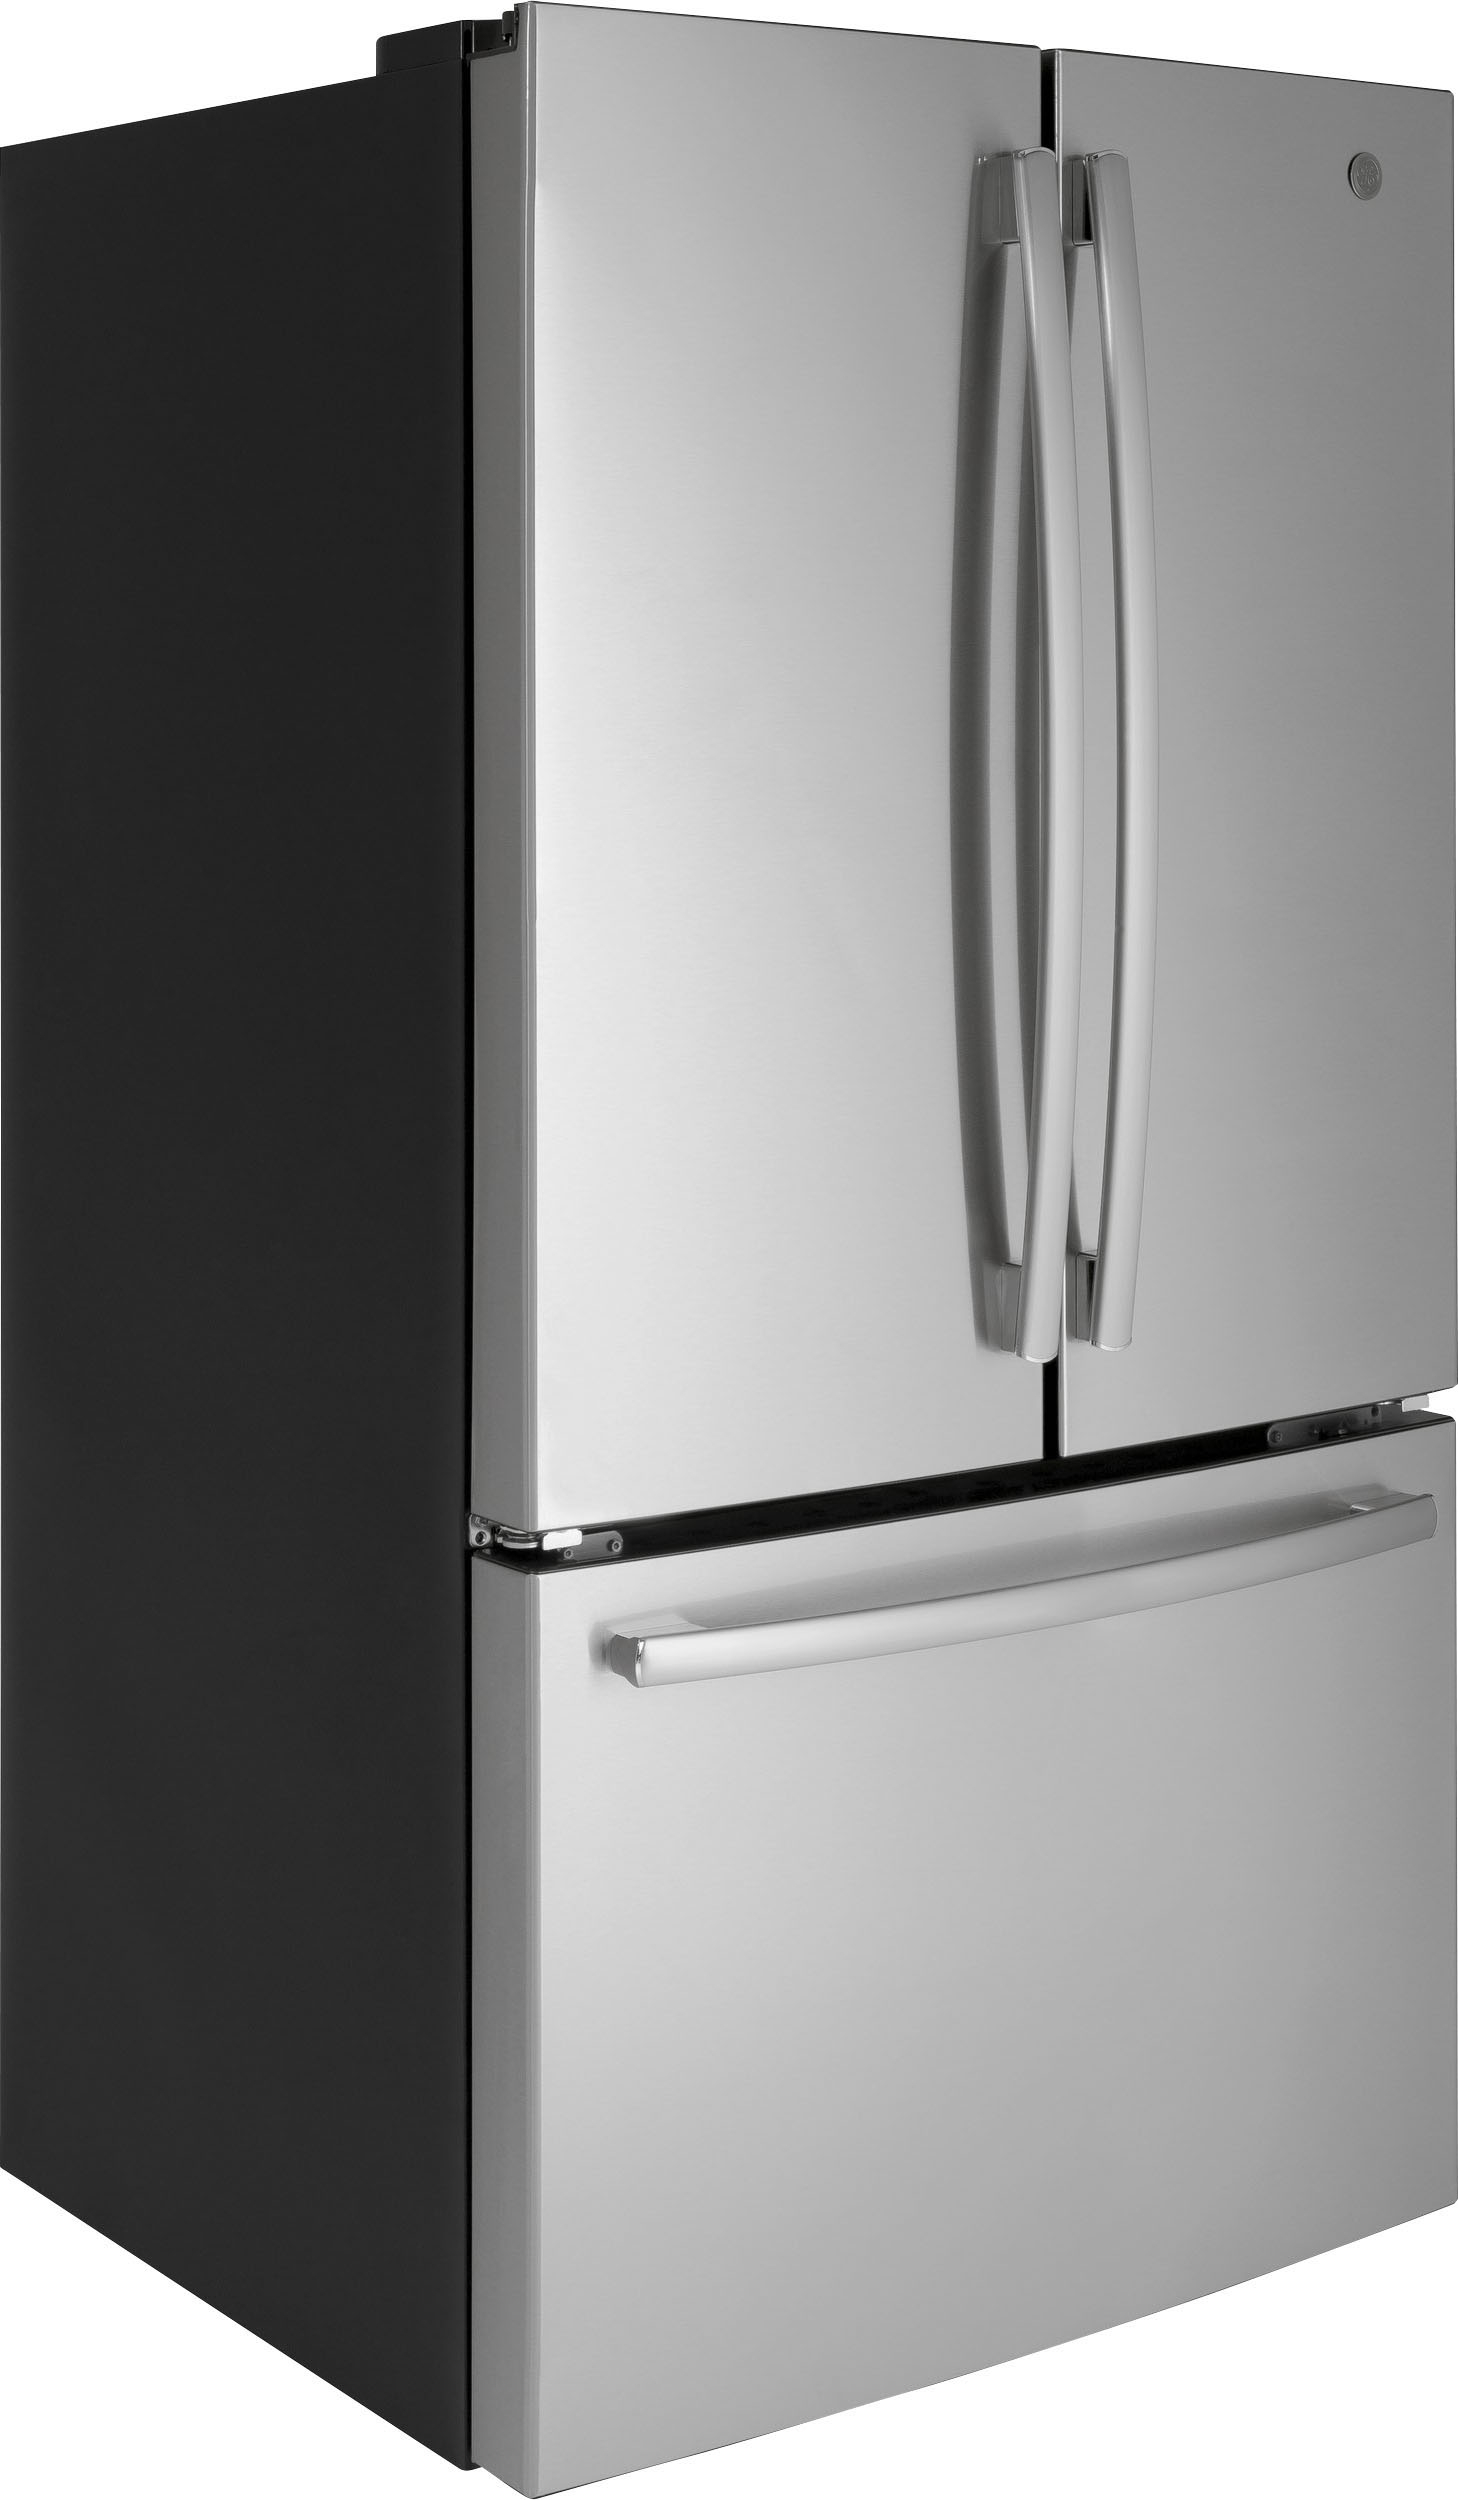 Angle View: GE - 27.0 Cu. Ft. French Door Refrigerator with Internal Water Dispenser - High gloss white